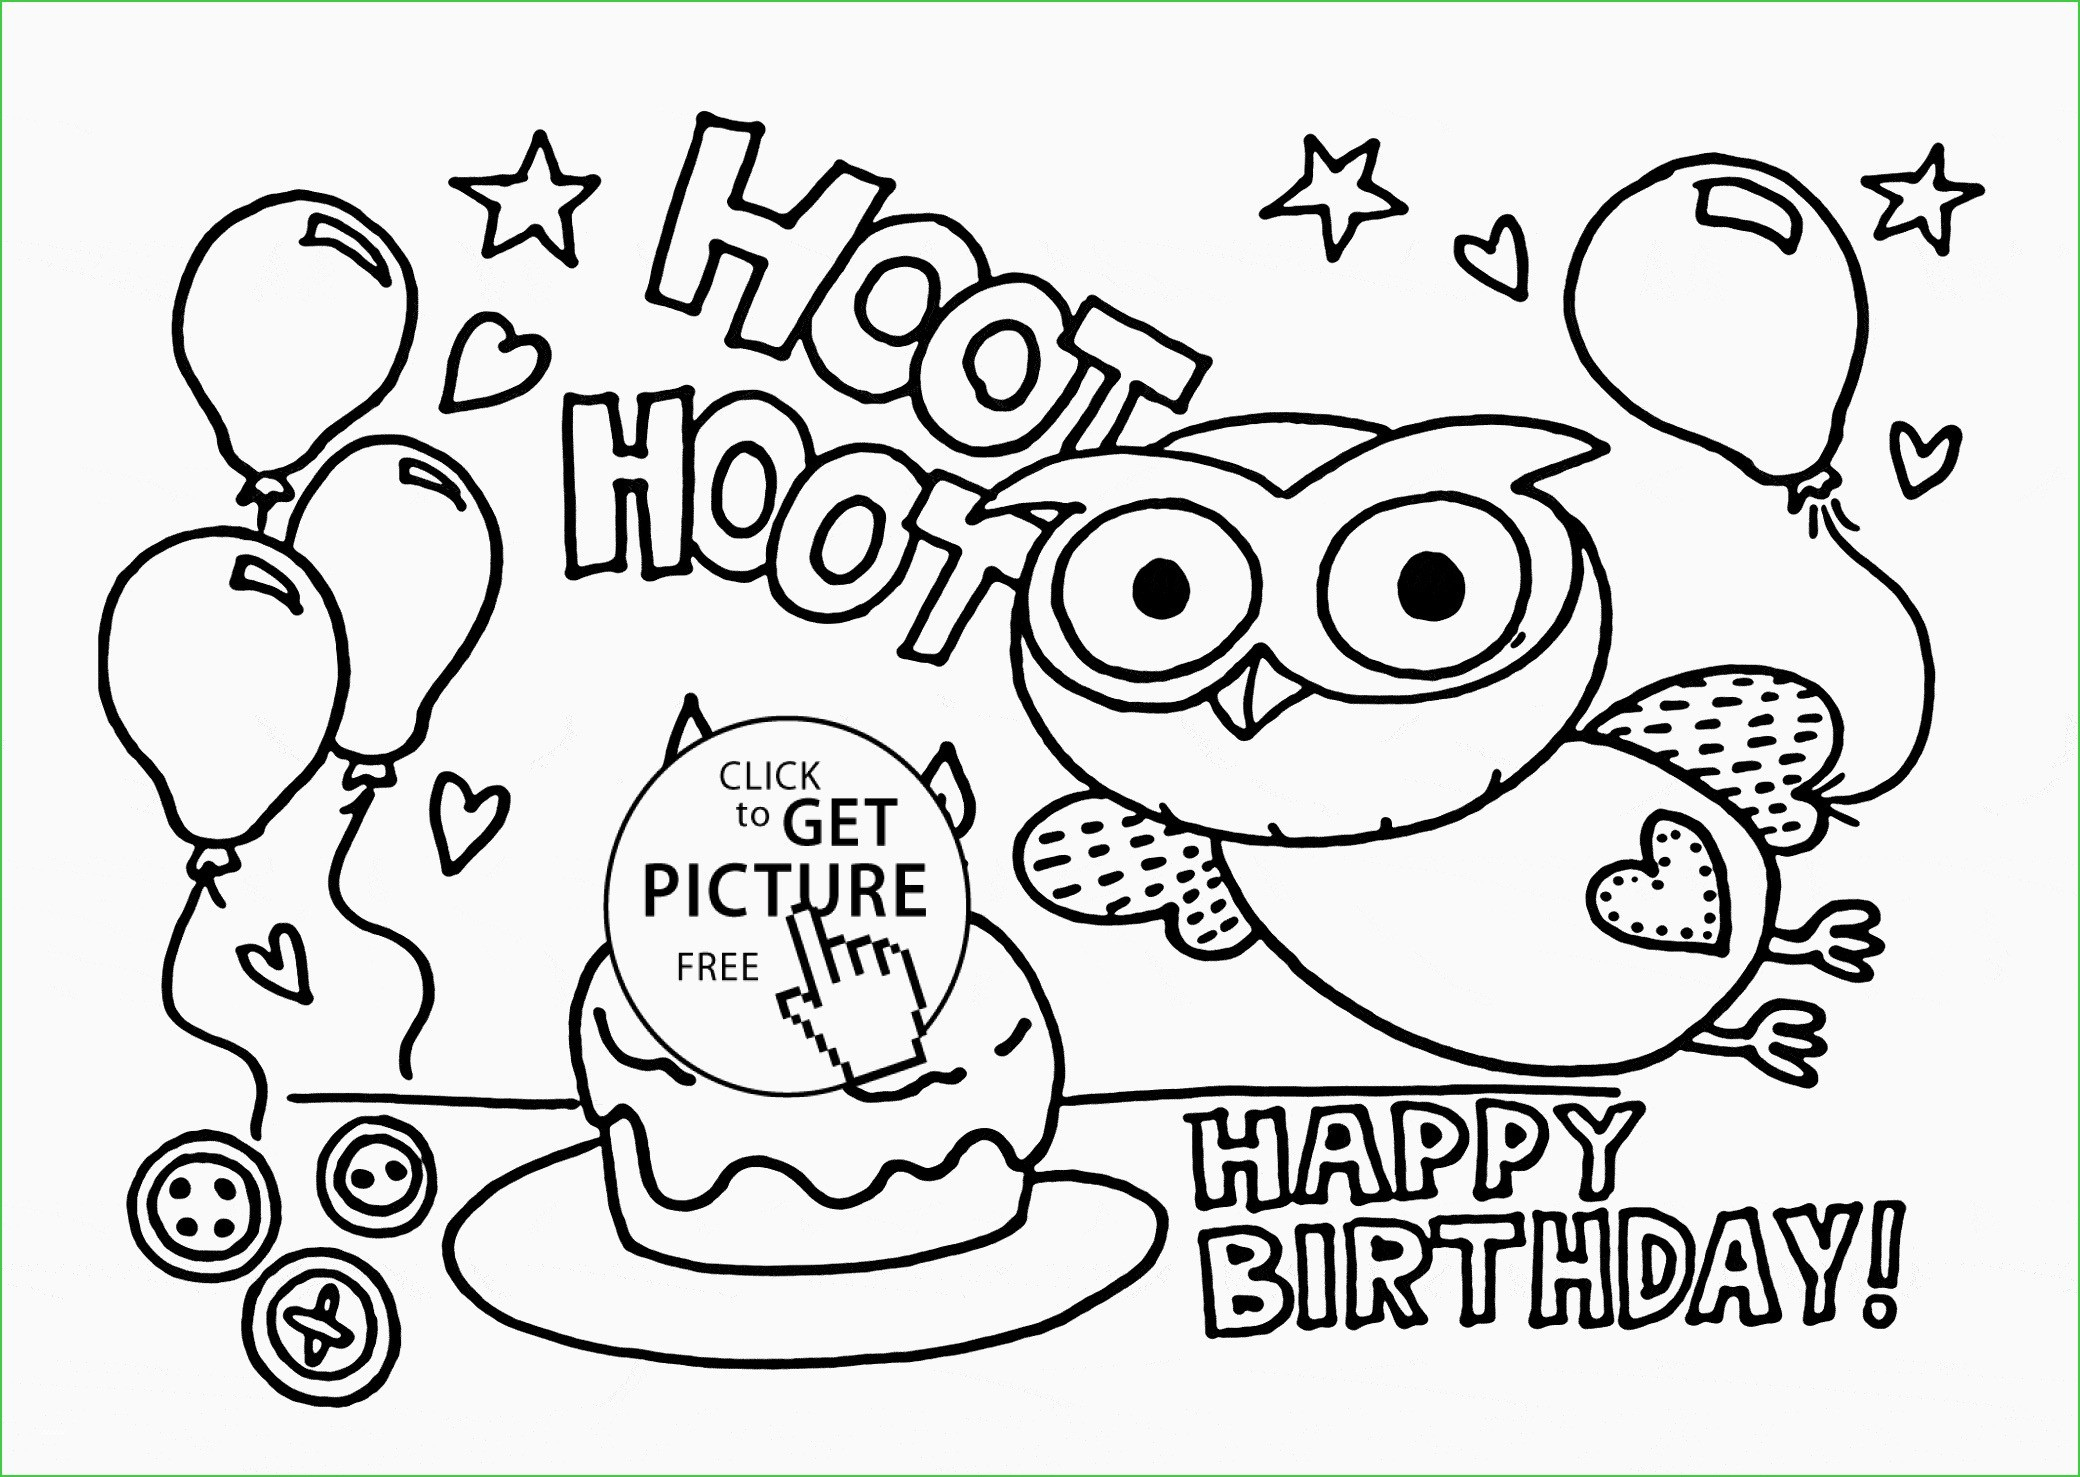 Free Printable 50Th Birthday Cards Funny | Popisgrzegorz - Free Printable 50Th Birthday Cards Funny